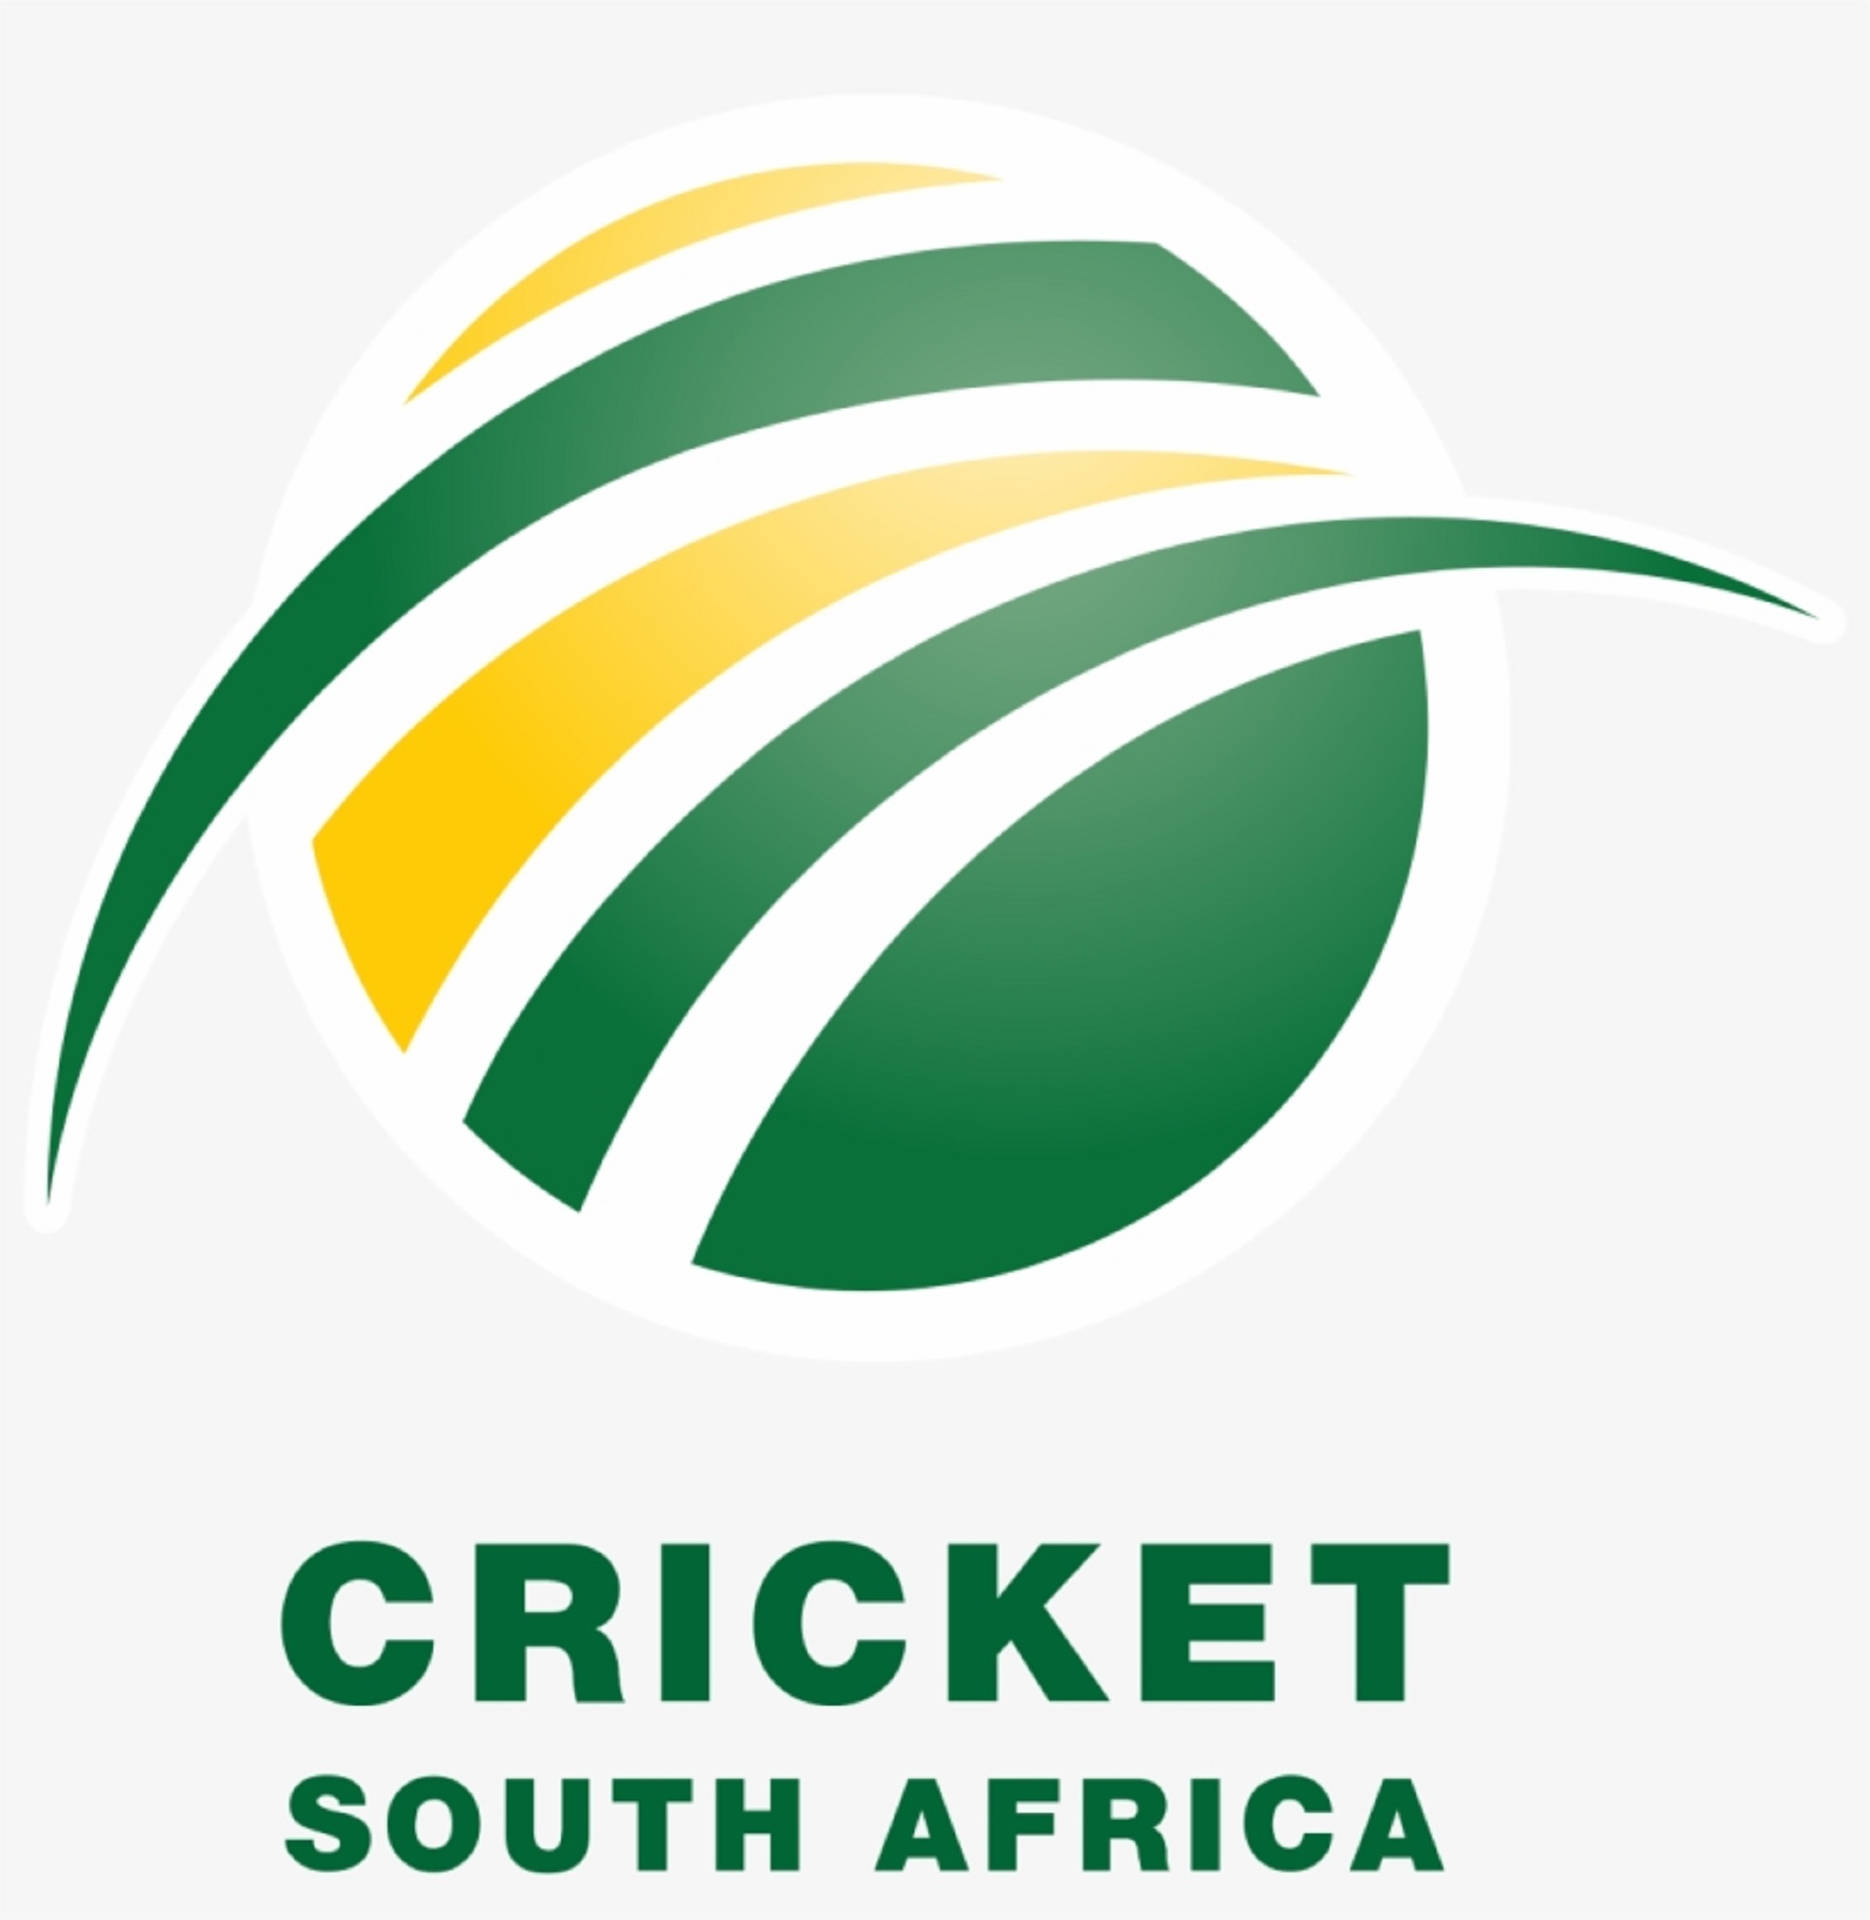 South Africa Cricket Logo In White Background